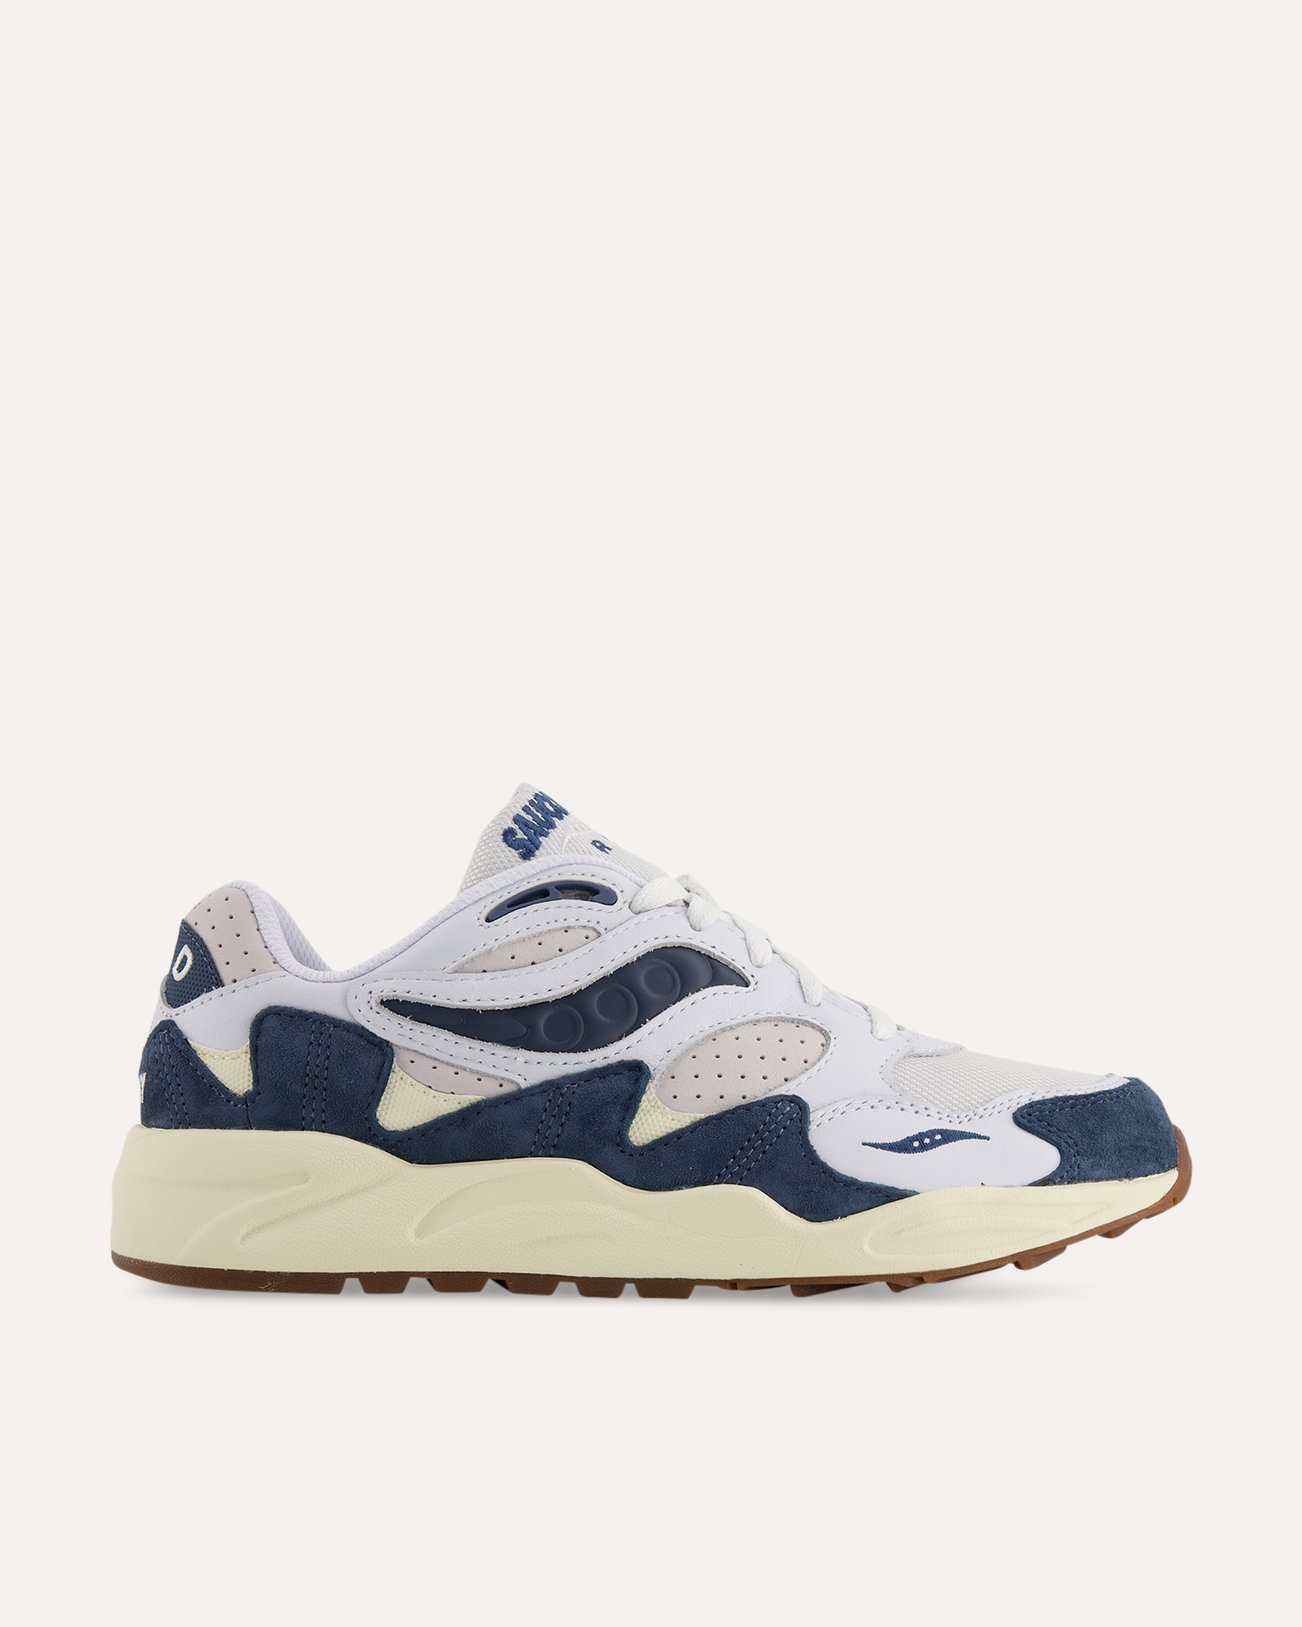 Saucony Grid Shadow 2 - White/Navy NAVY 1